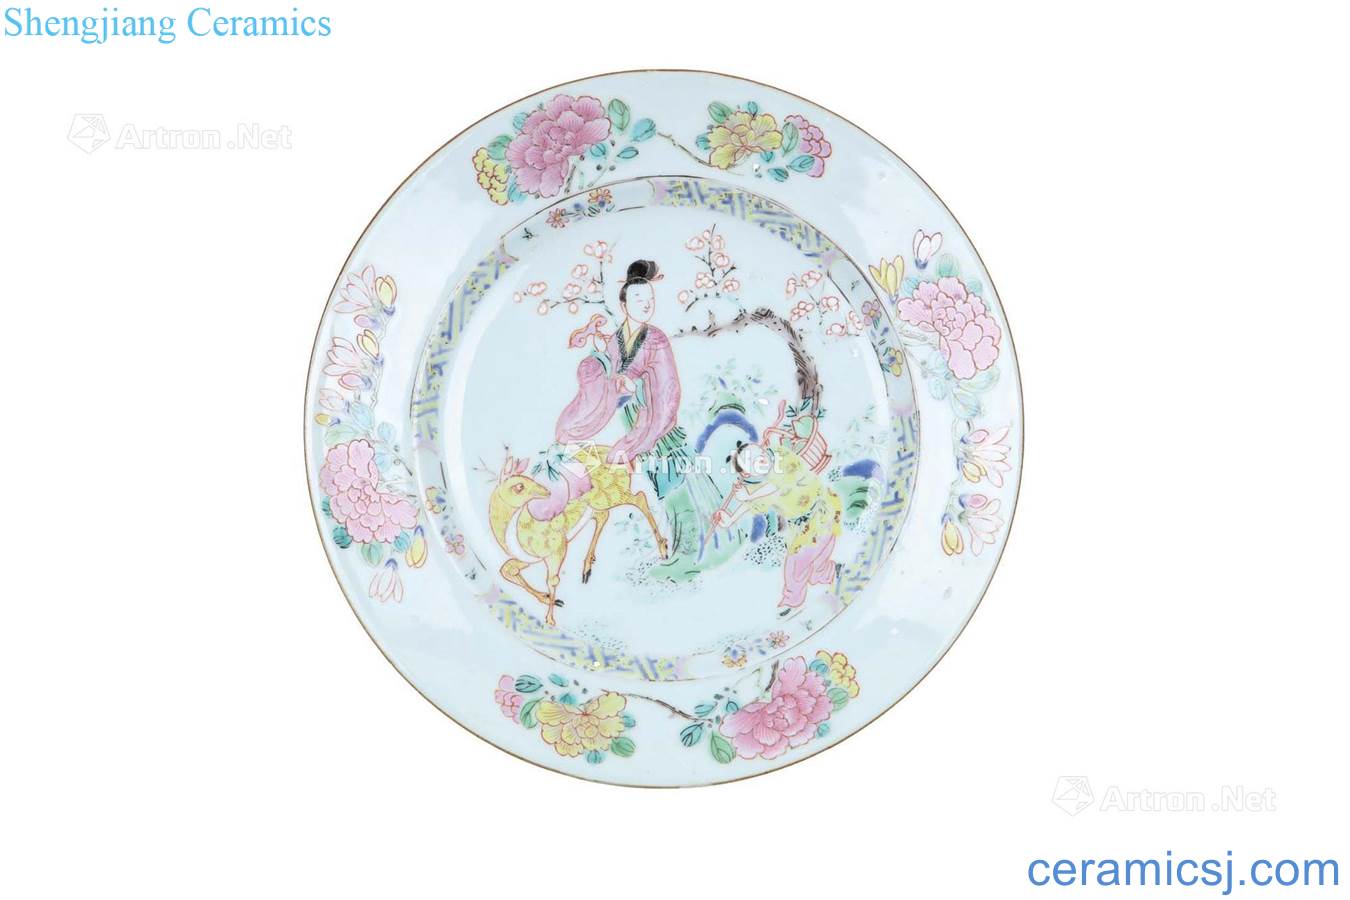 Qing dynasty about 1740 years however, pastel and deer design tray